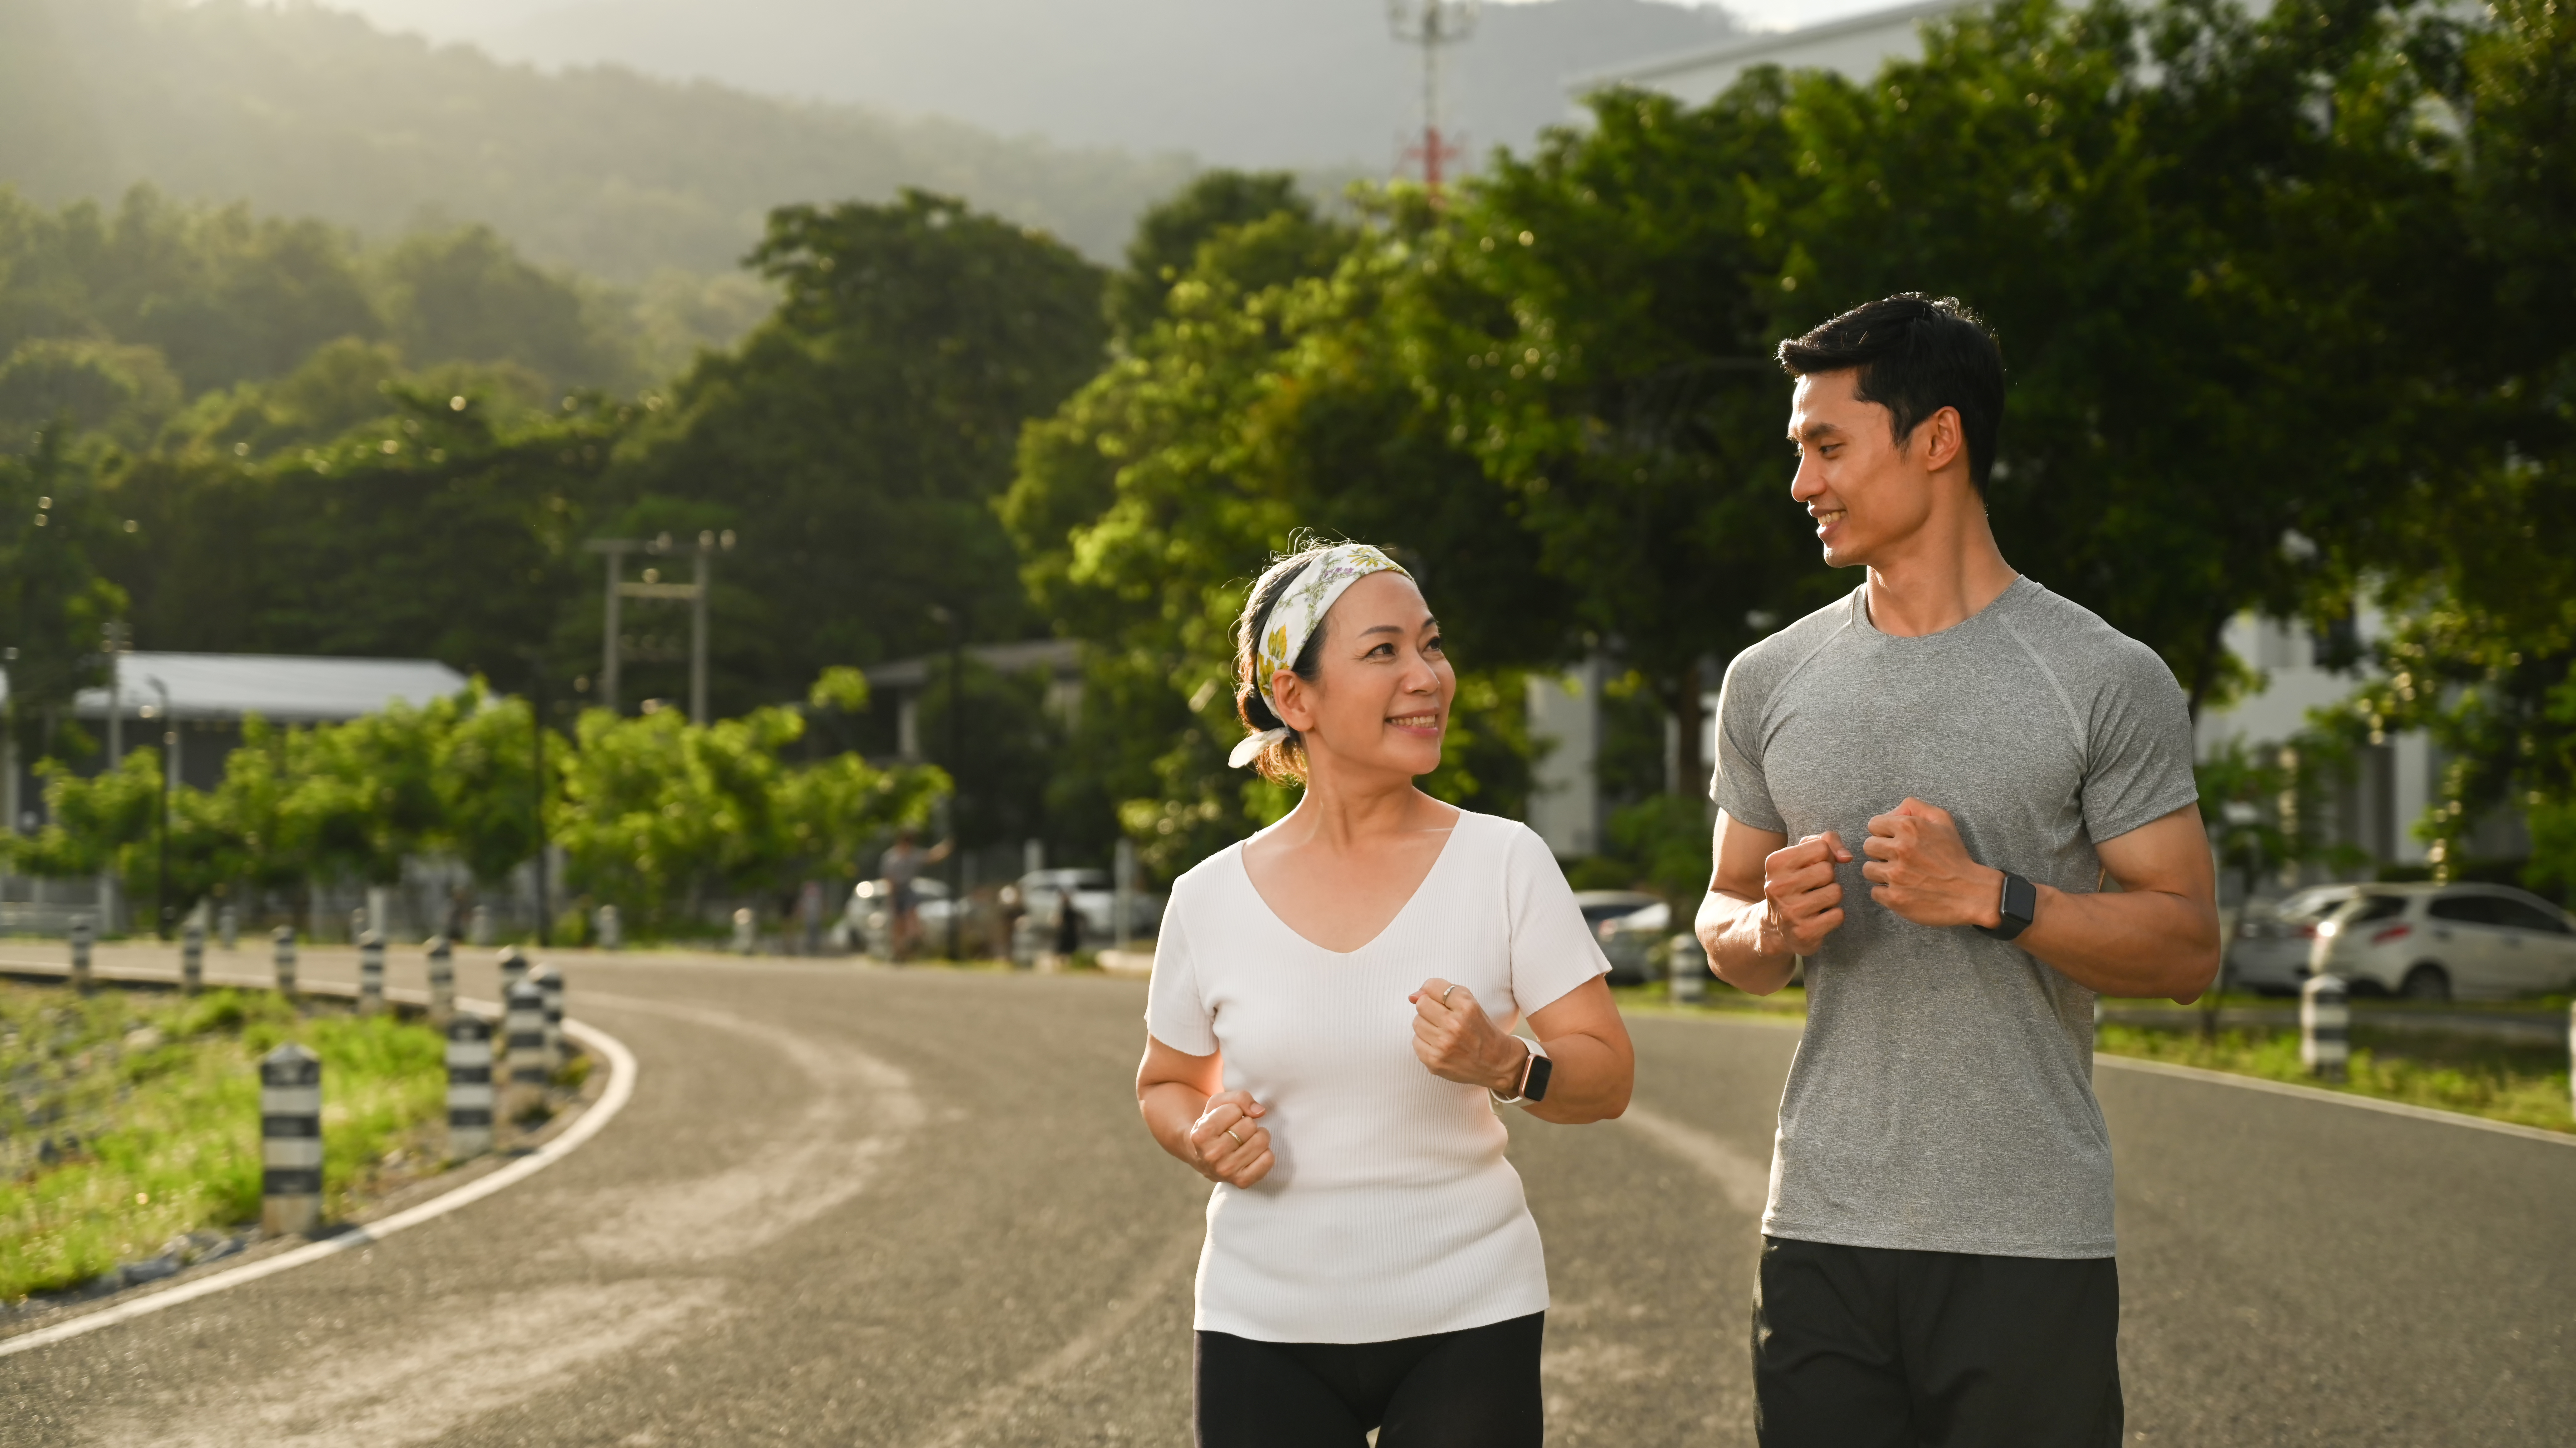 senior-woman-young-male-instructor-jogging-park-healthy-lifestyle-fitness-concept-1